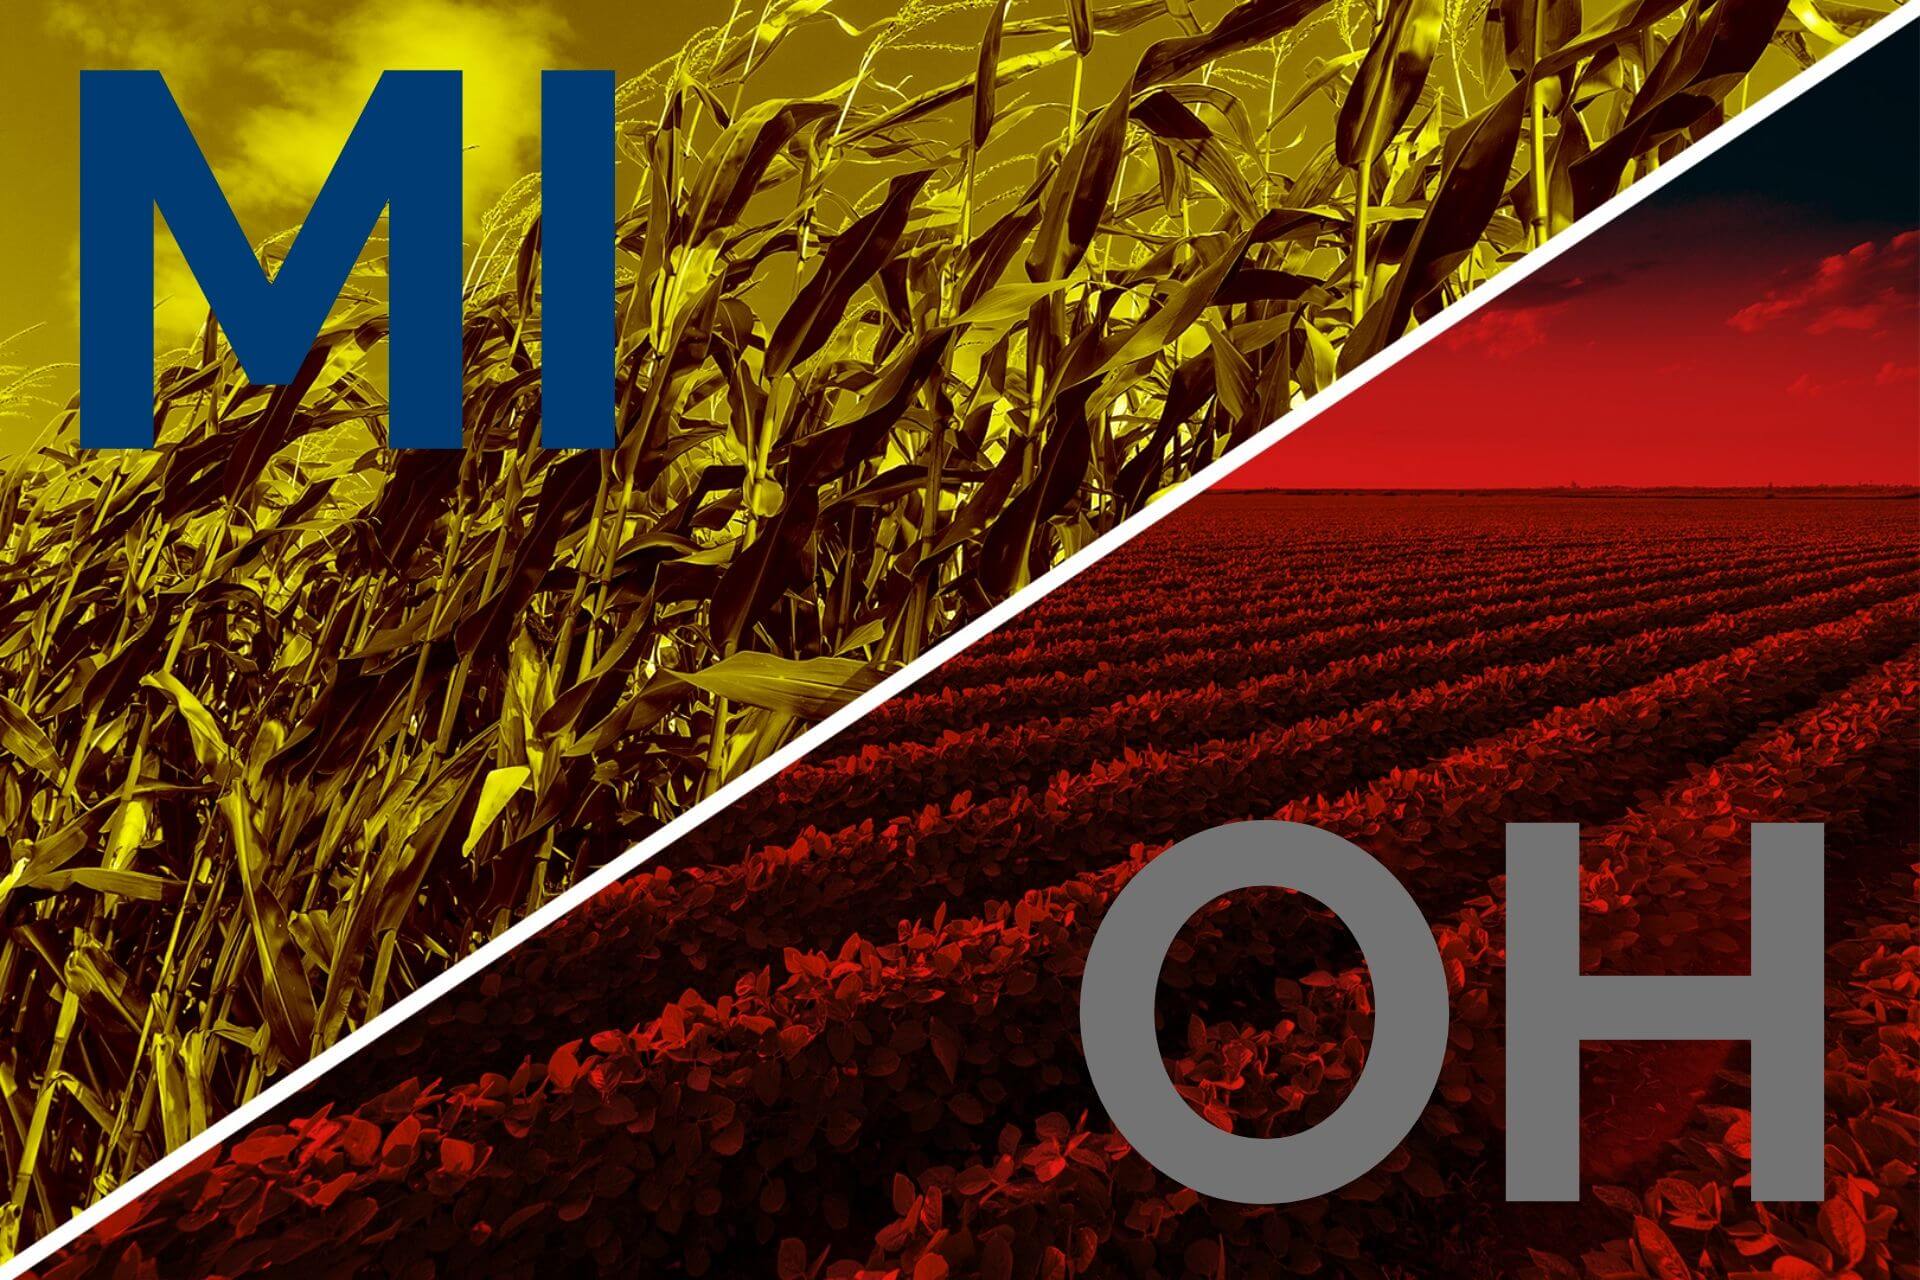 Promo for article comparing Michigan and Ohio agriculture. Graphic is split between red and yellow filters over photos of soybeans and corn respectively.